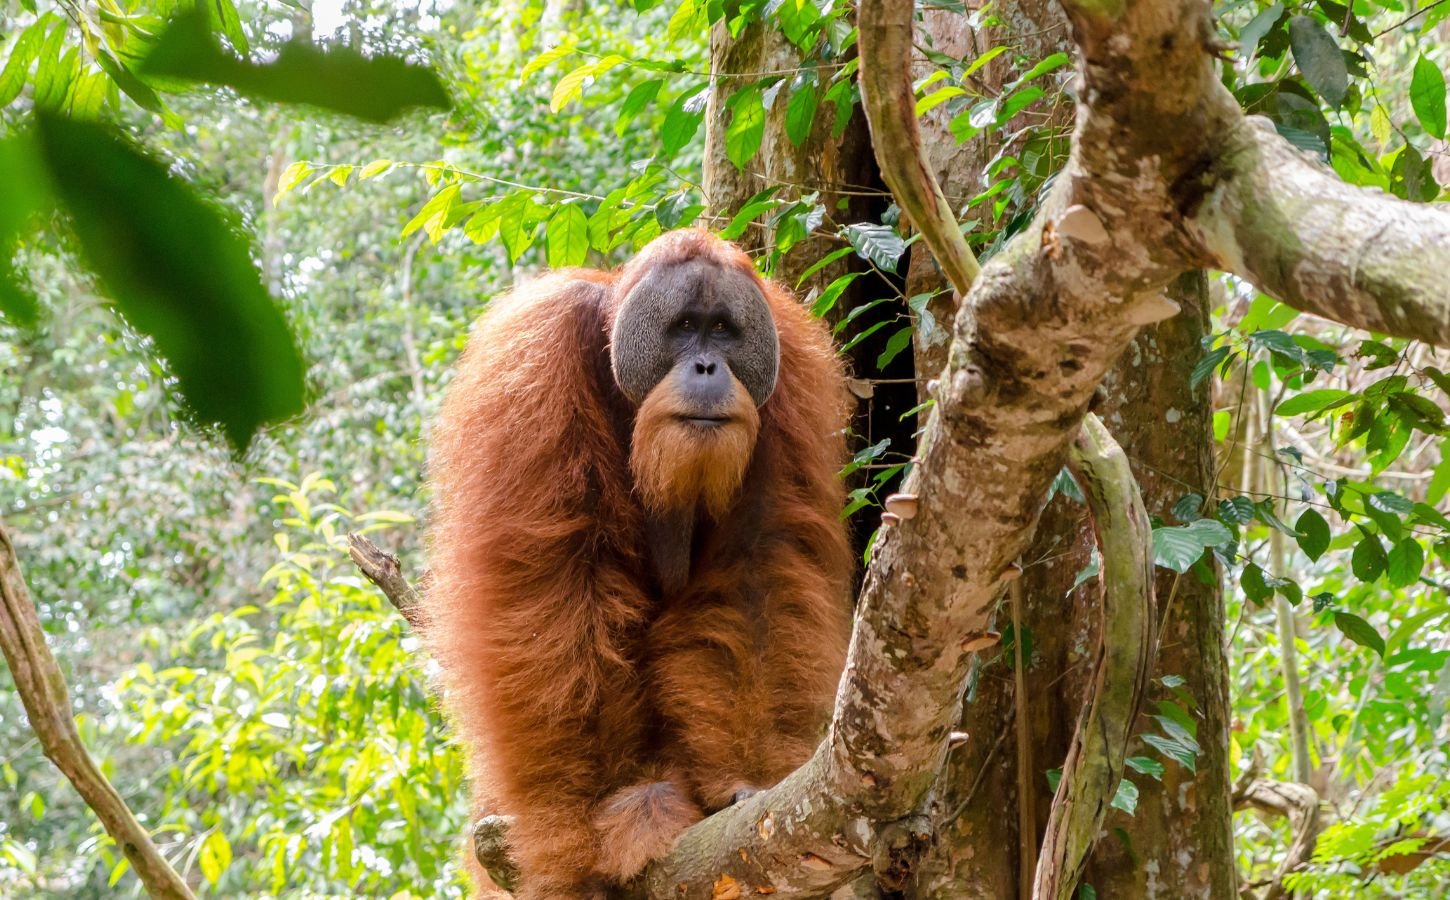 Orangutan Treats Wound With Medicinal Plant In First Recorded Case